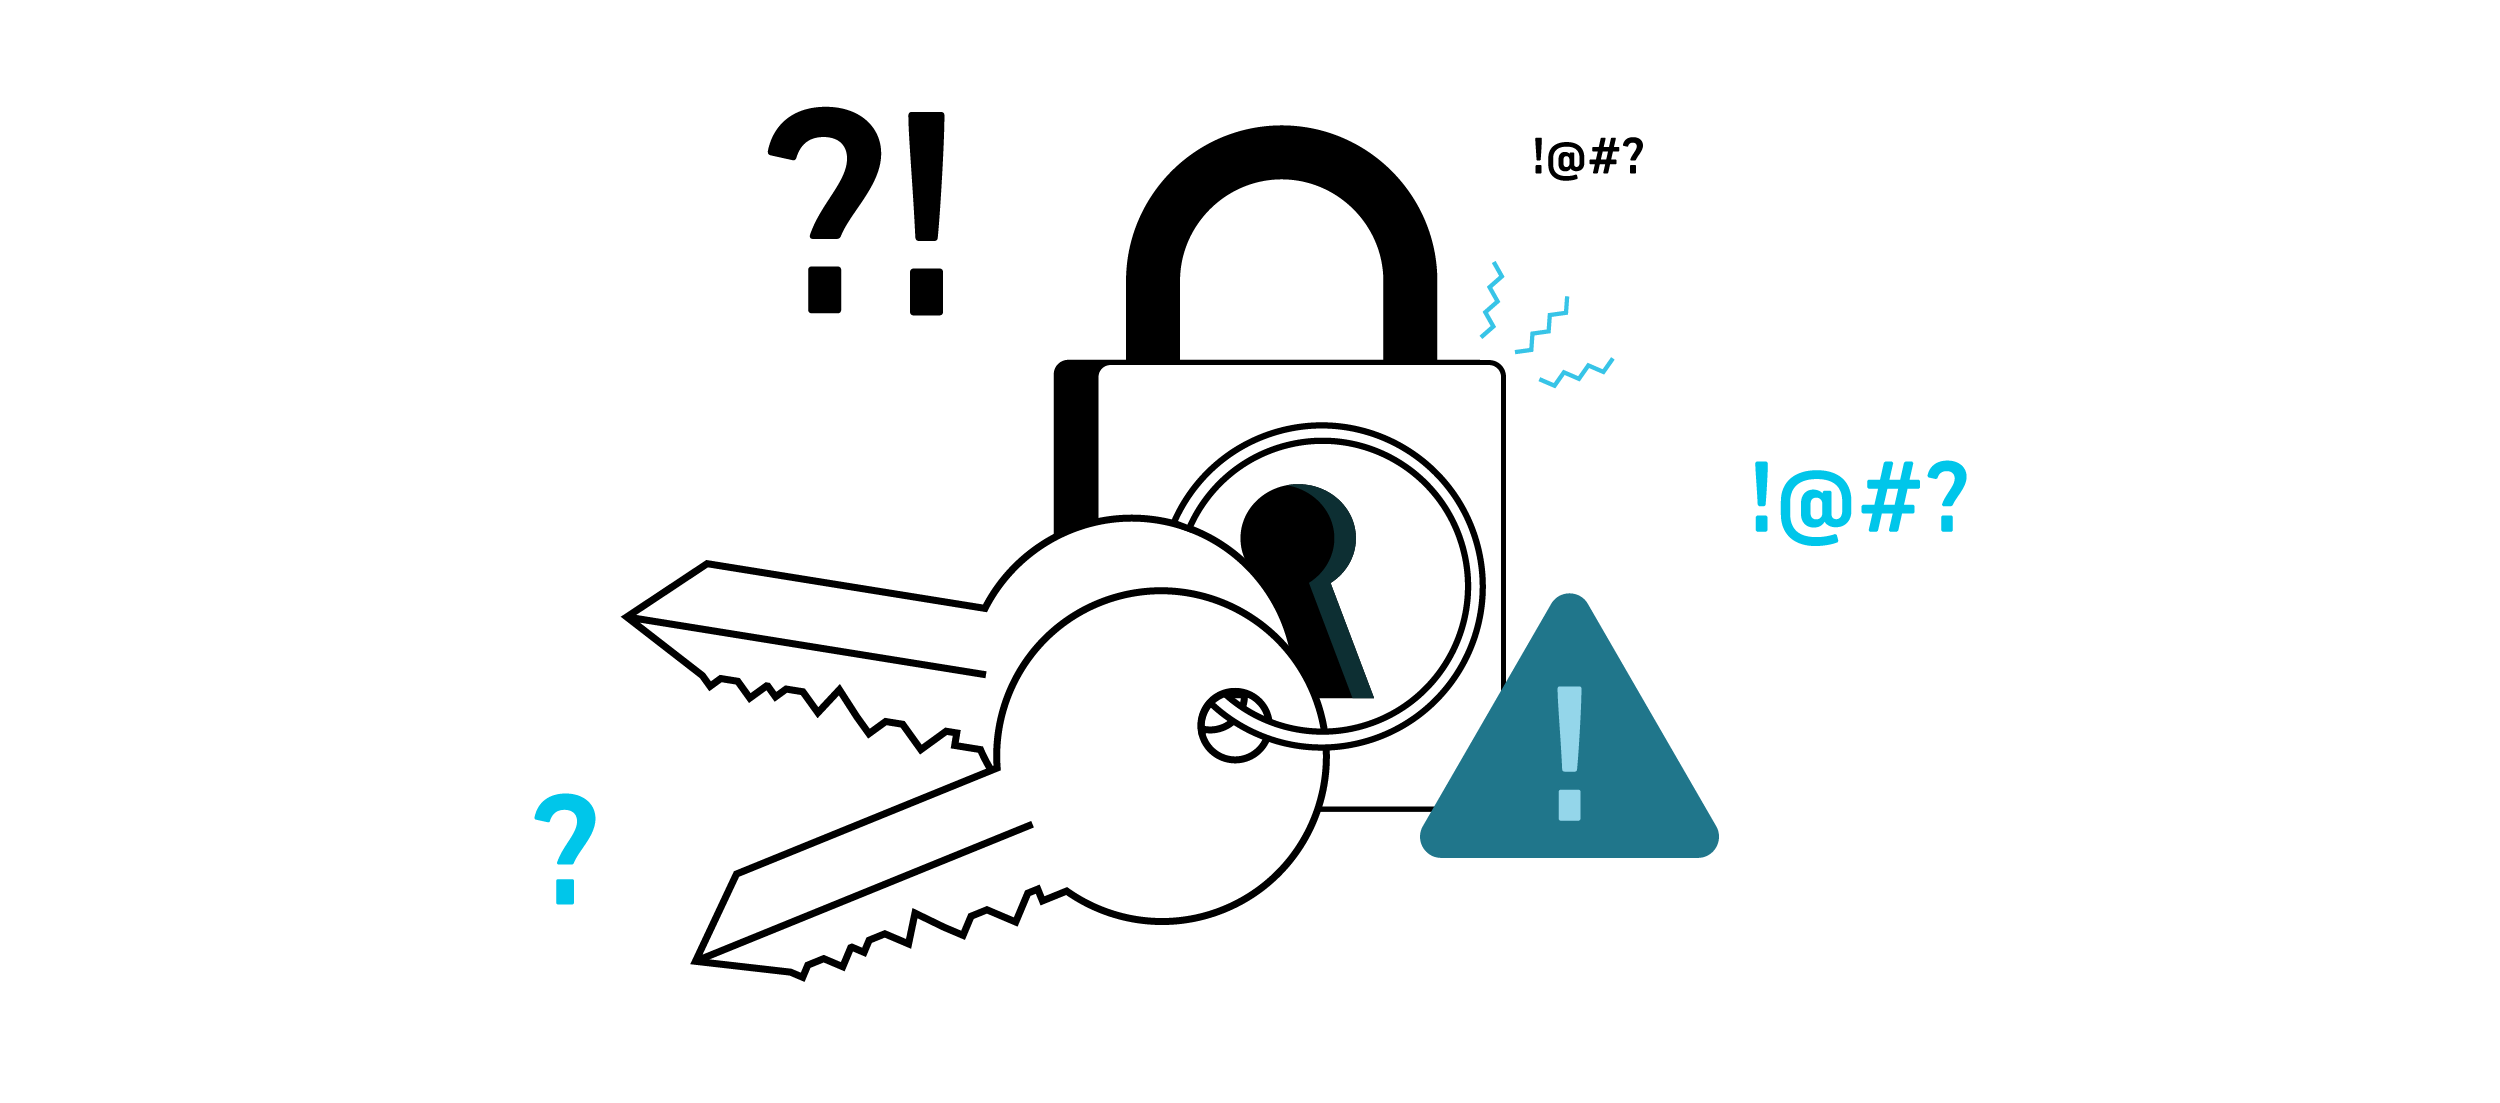 An illustration of a lock and key